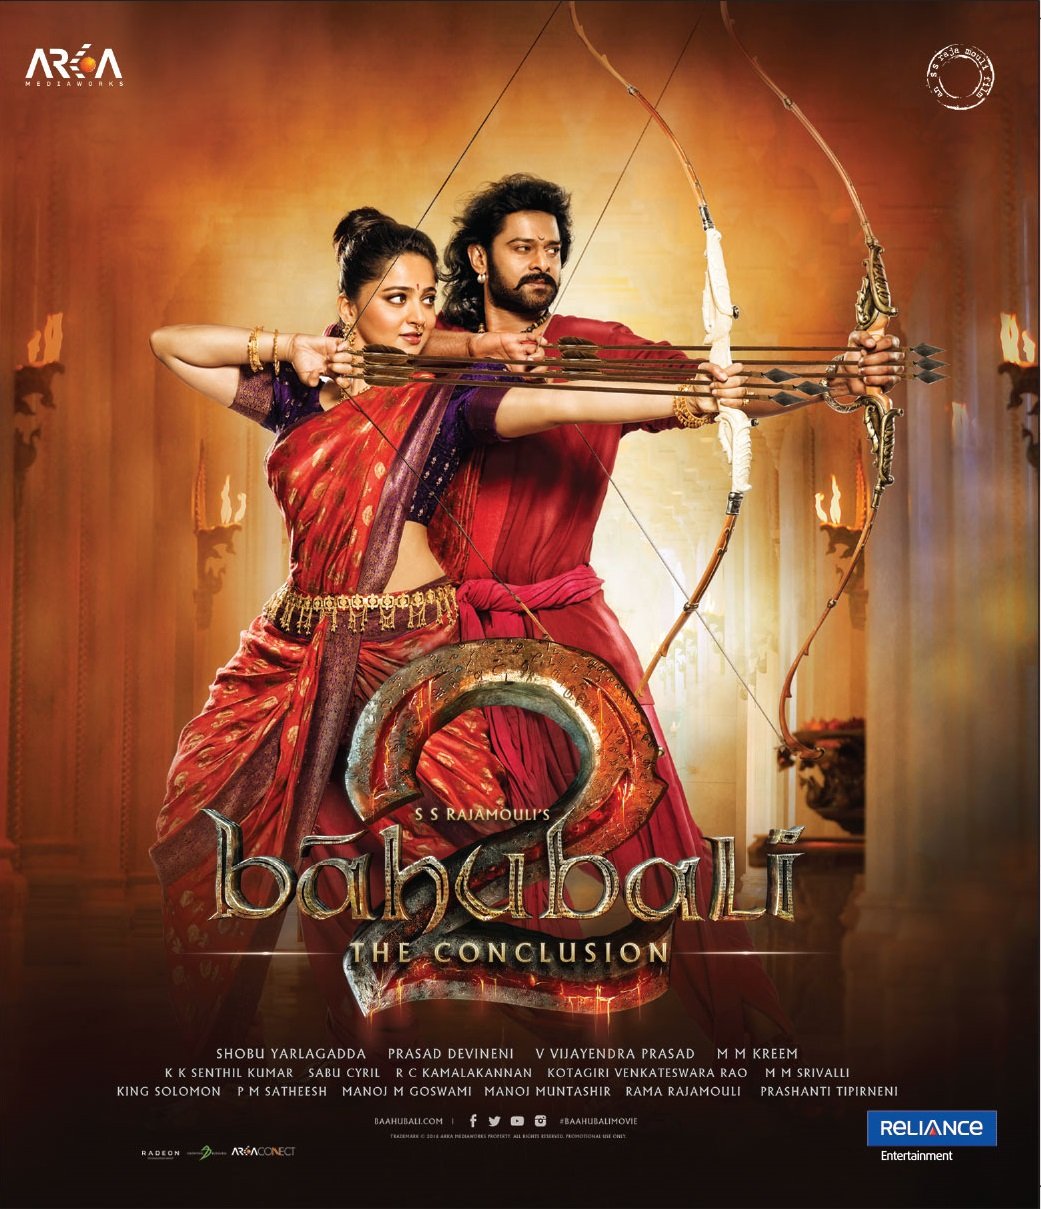 Best South Indian Movies Dubbed in Hindi - Baahubali 2: The Conclusion